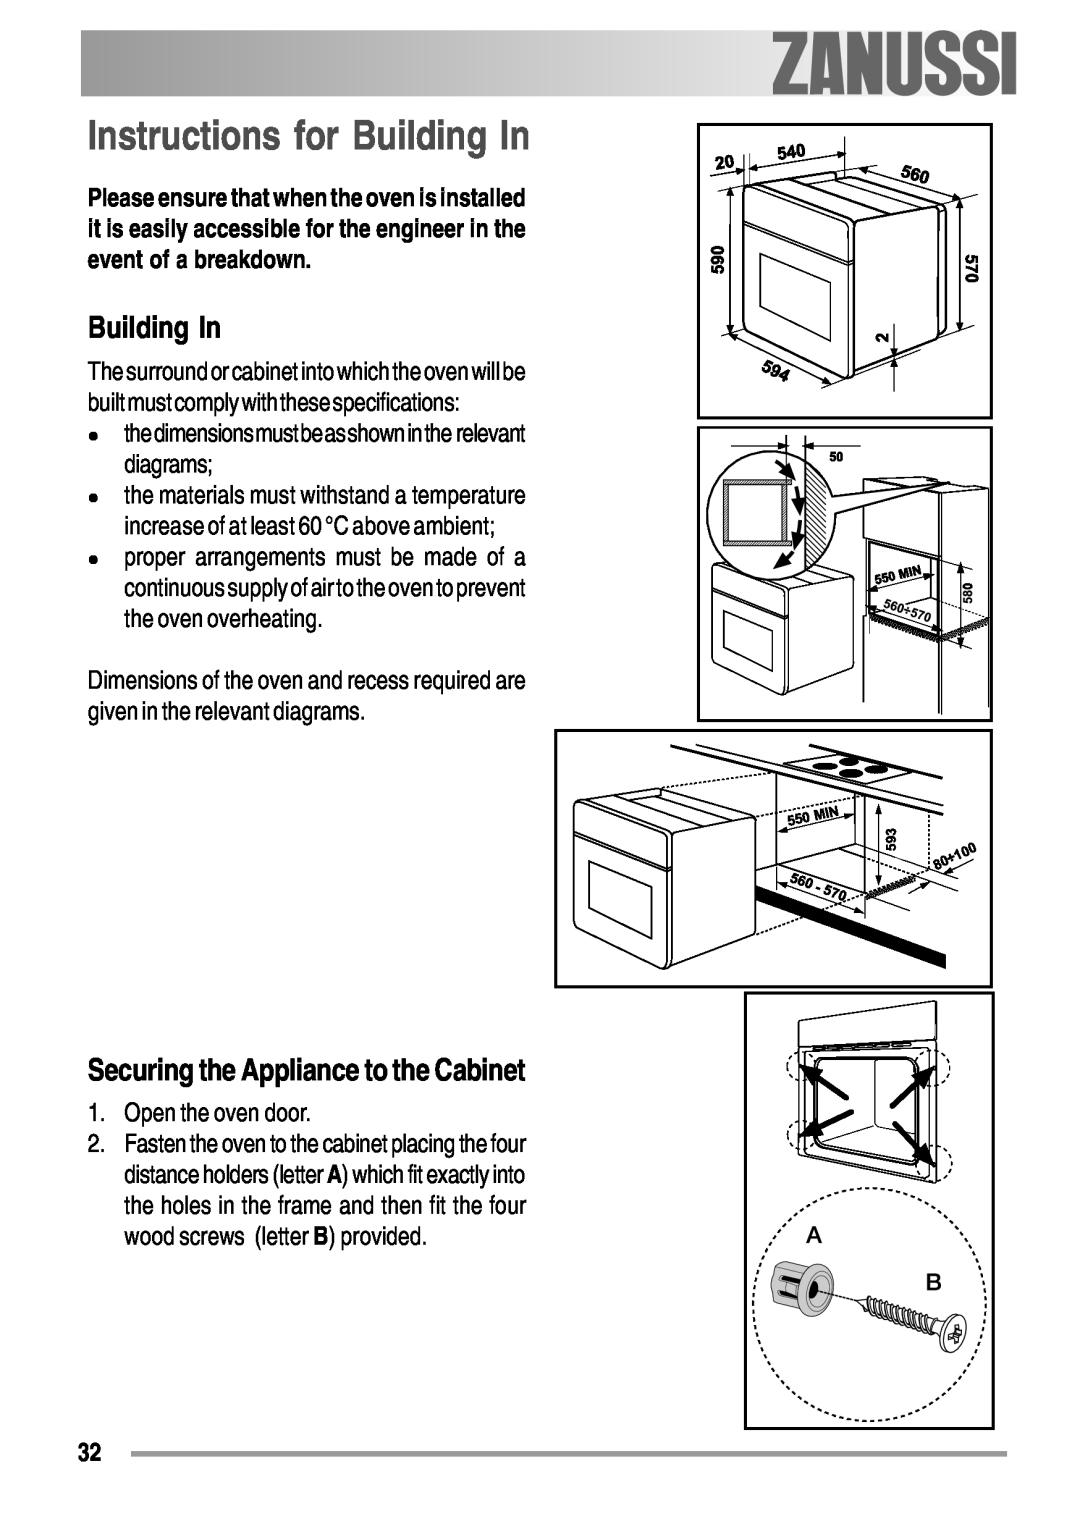 Zanussi ZOB 550 user manual Instructions for Building In, Securing the Appliance to the Cabinet, Open the oven door 